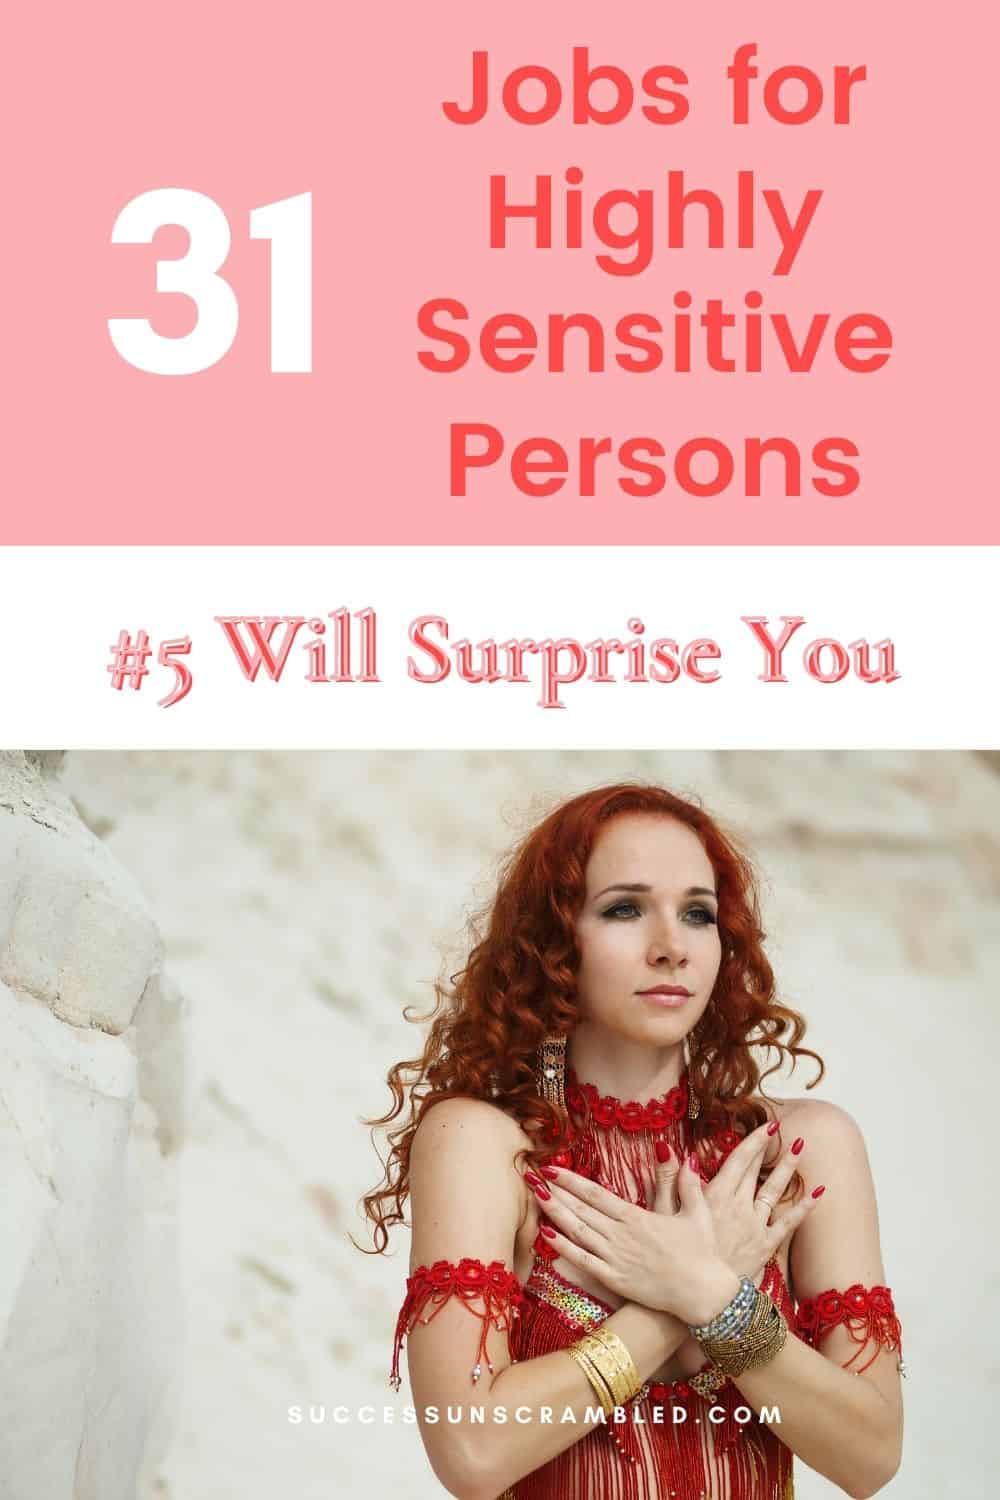 31 Jobs for Highly Sensitive Persons Pin